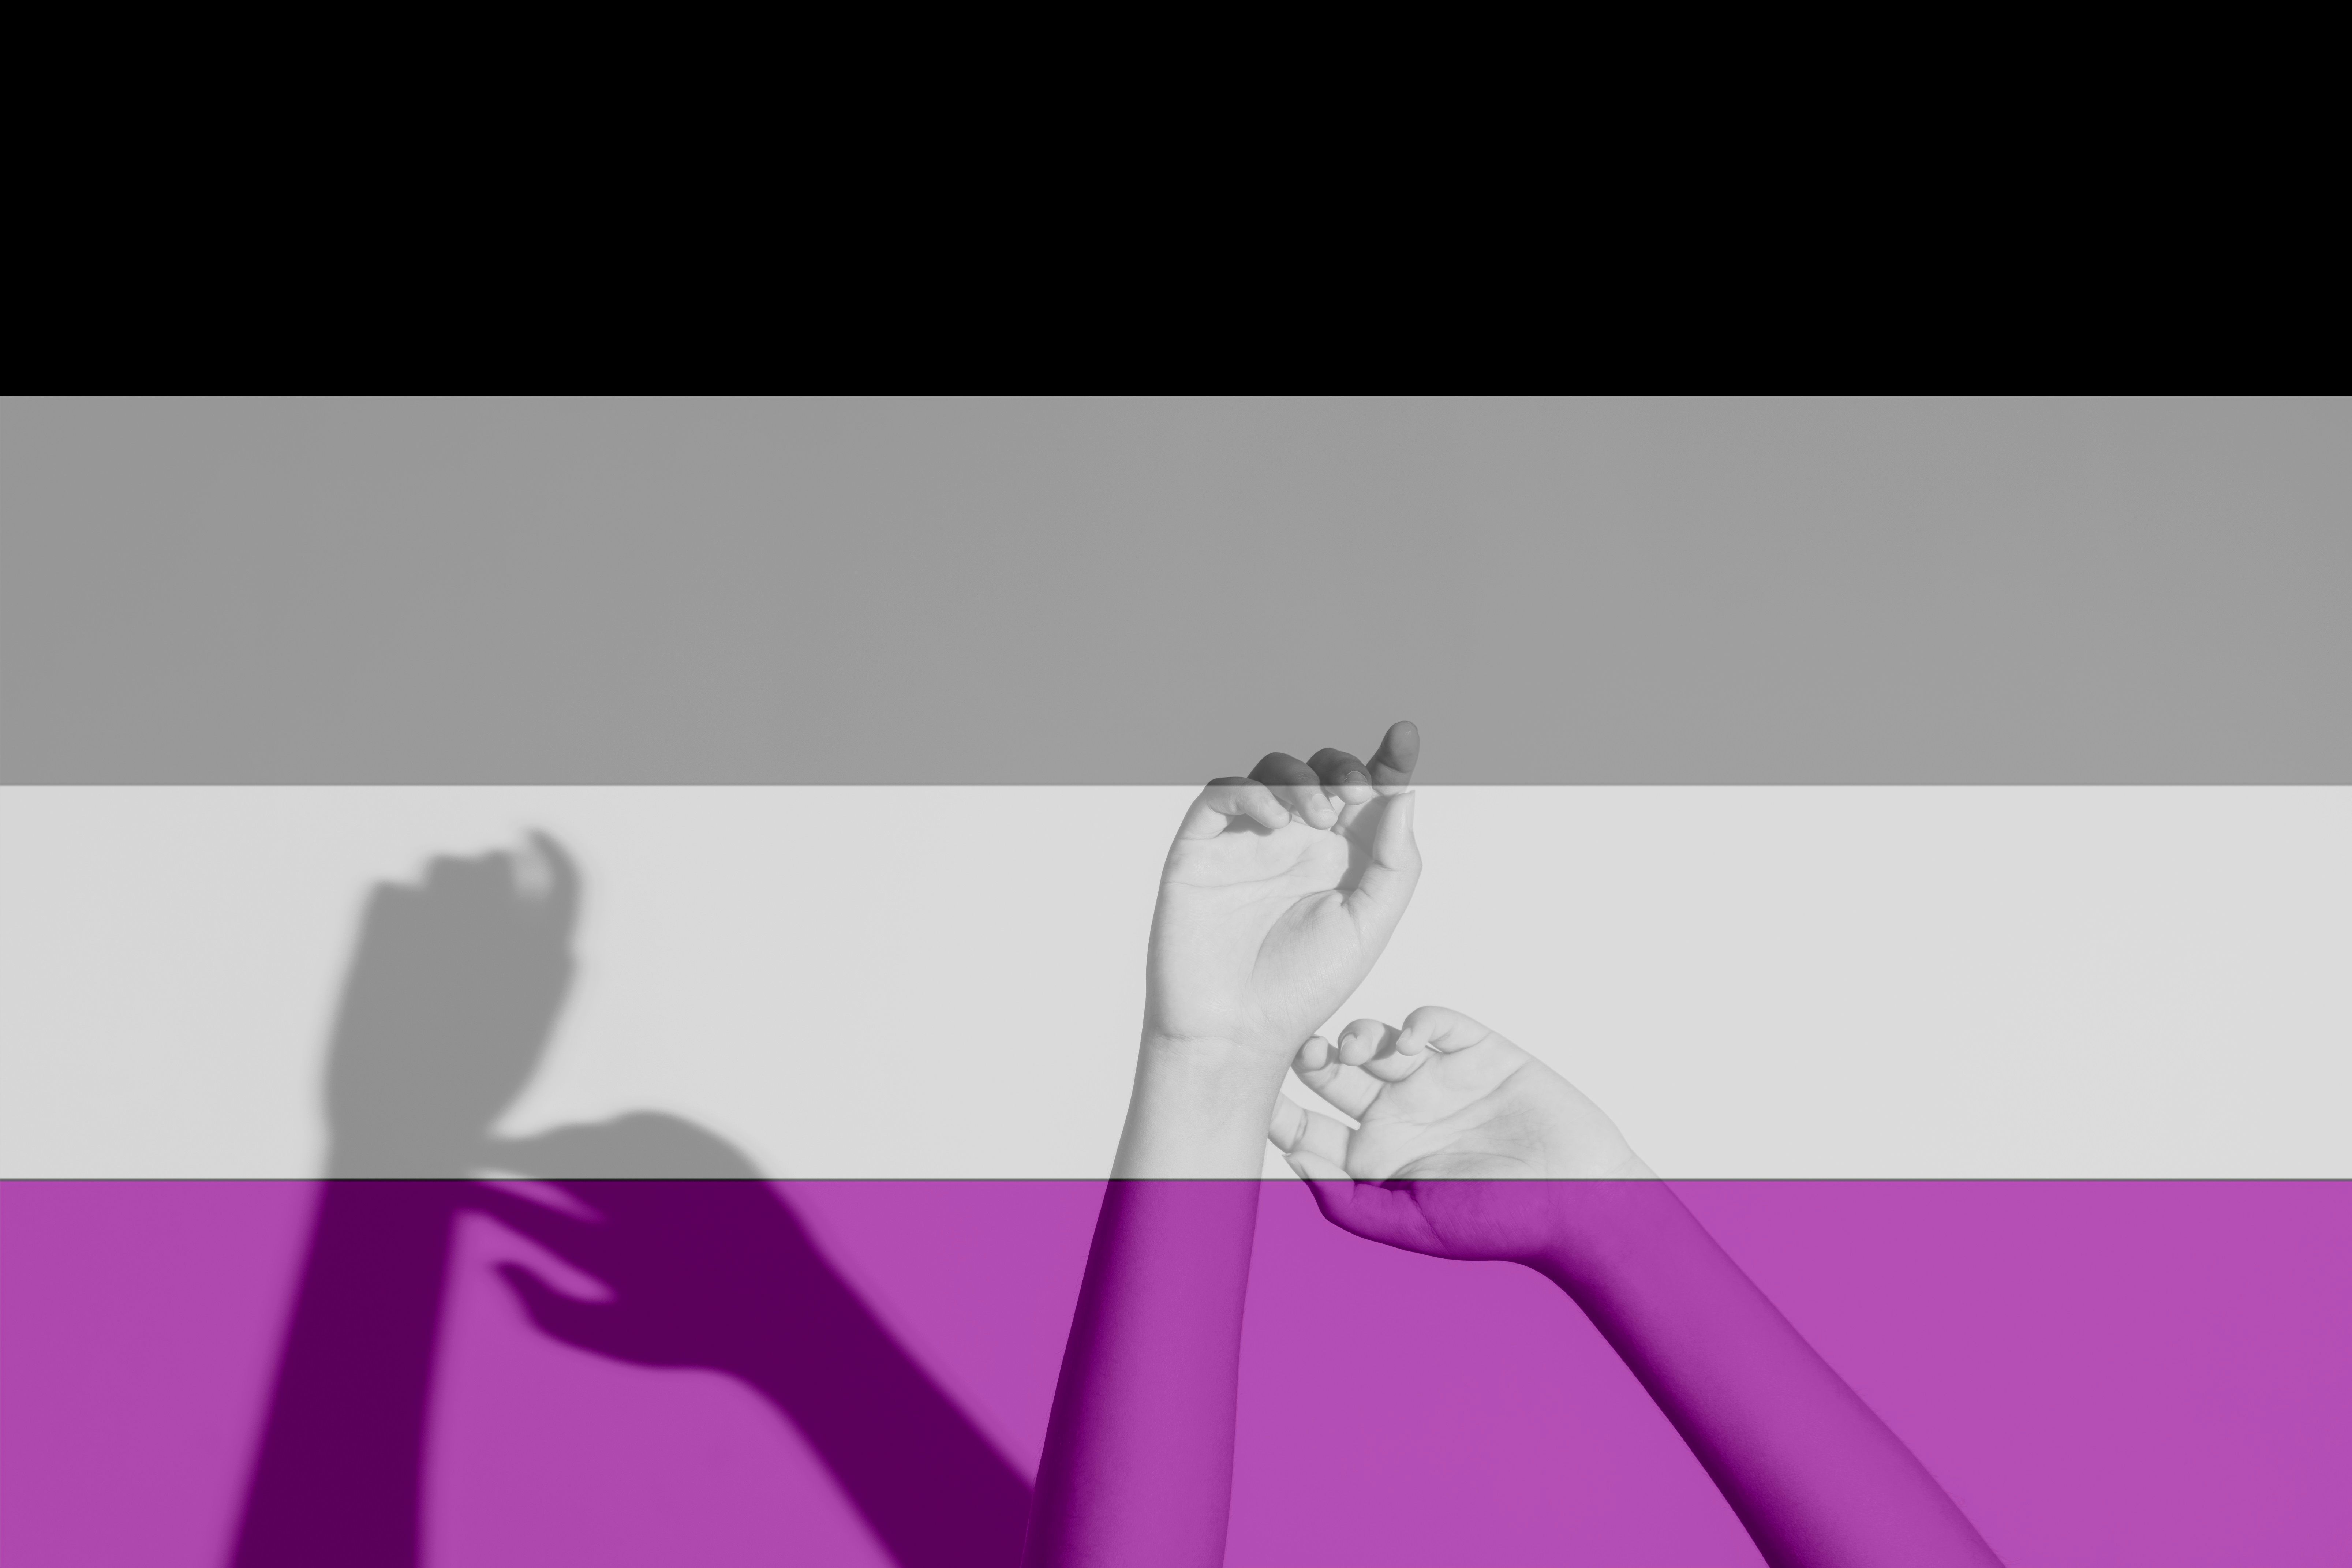 Asexual meaning and definition - What is asexual?